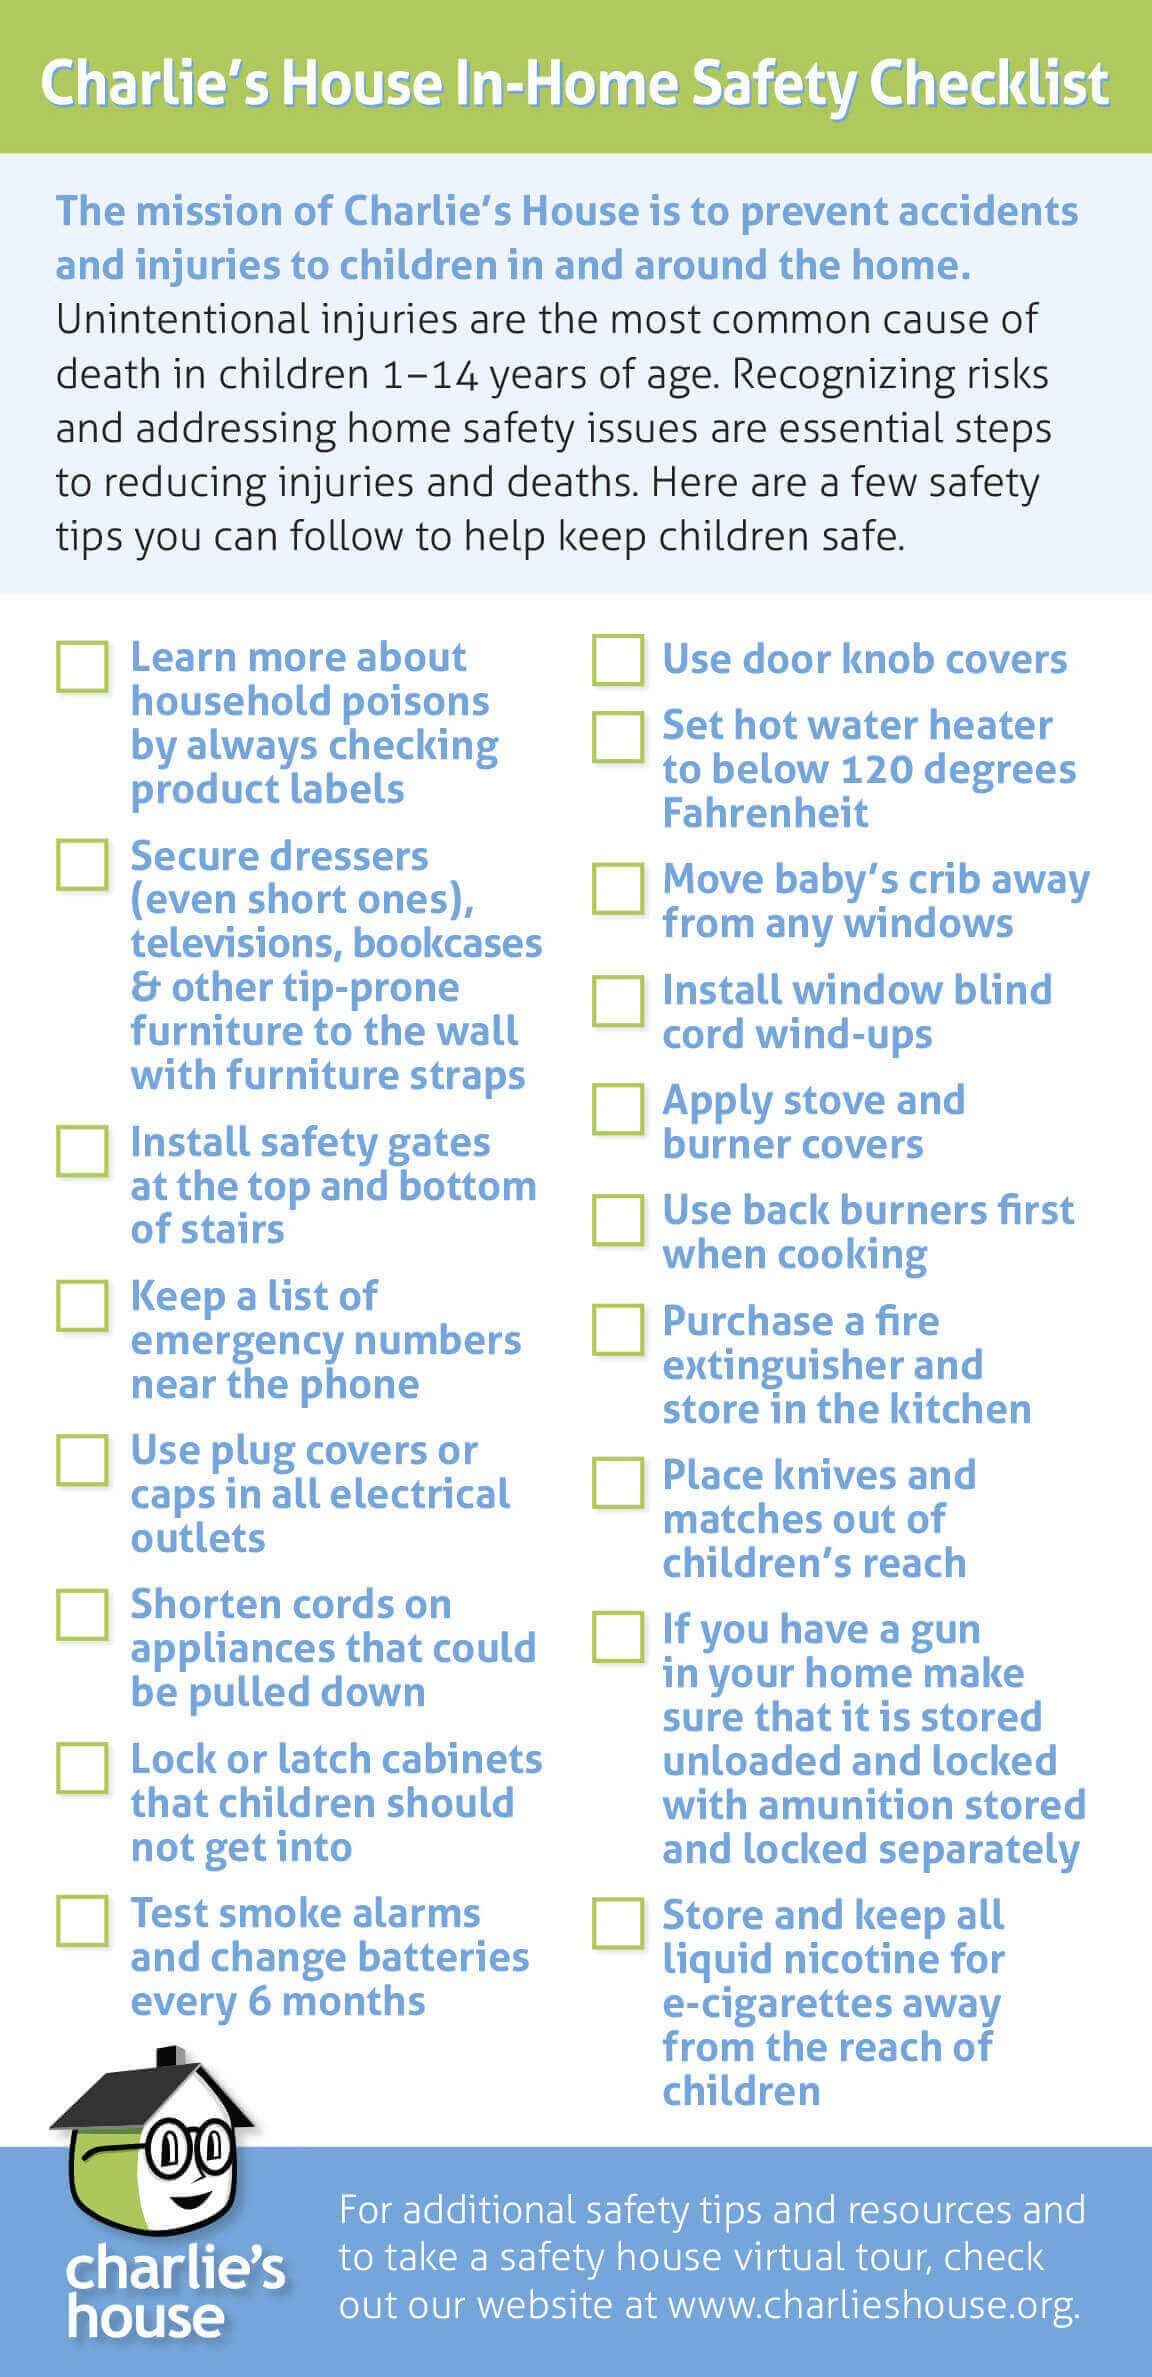 https://www.charlieshouse.org/assets/images/upload/Charlies-House-Safety-Check-List-Final-1.jpg